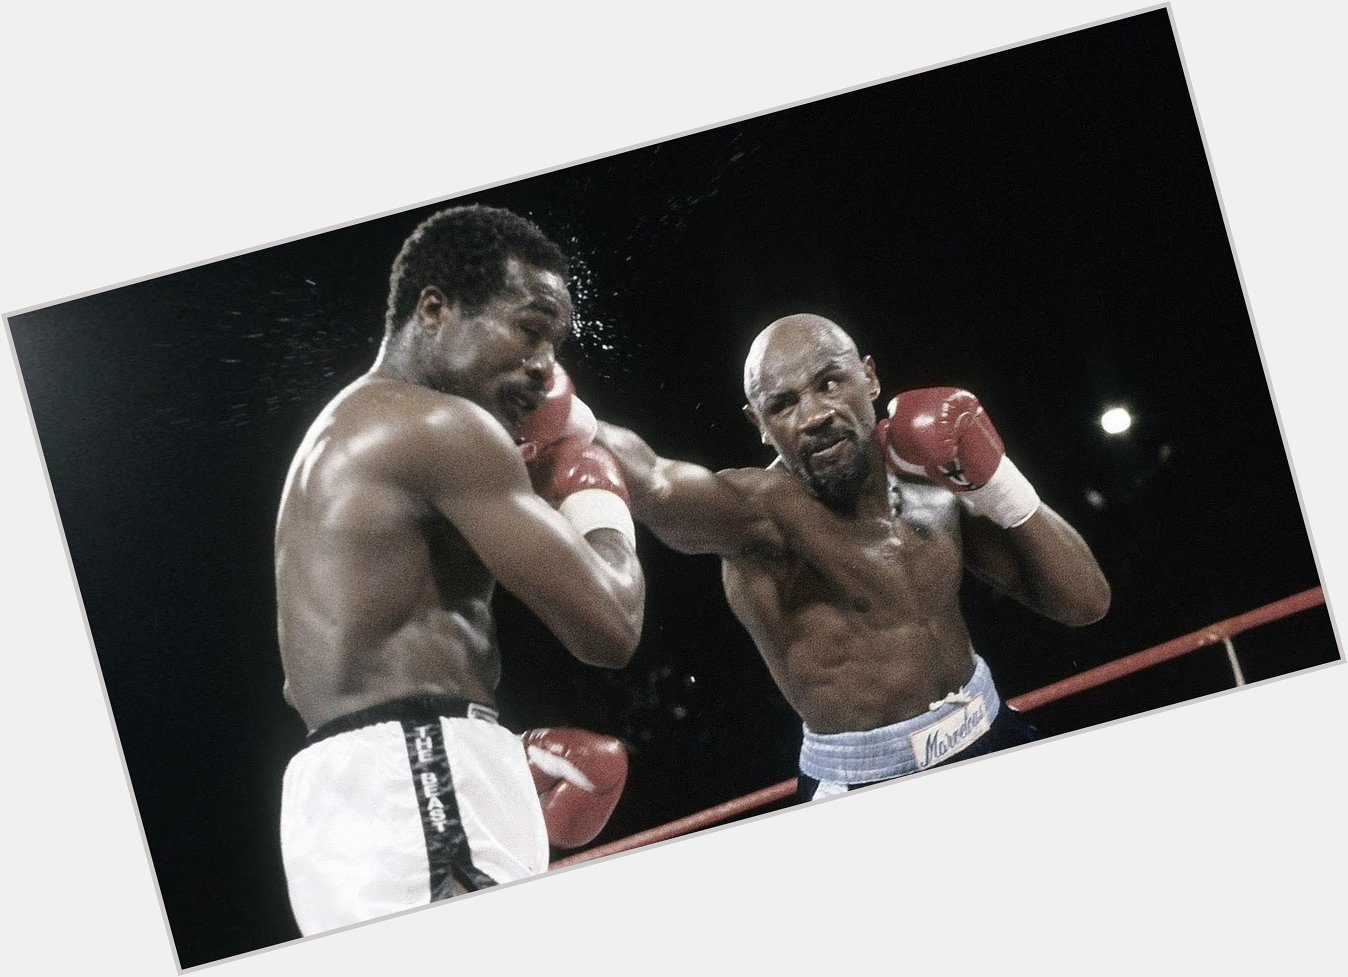 A happy birthday to the Marvelous one - Middleweight Champion- Jersey s own, Marvin Hagler!!! 